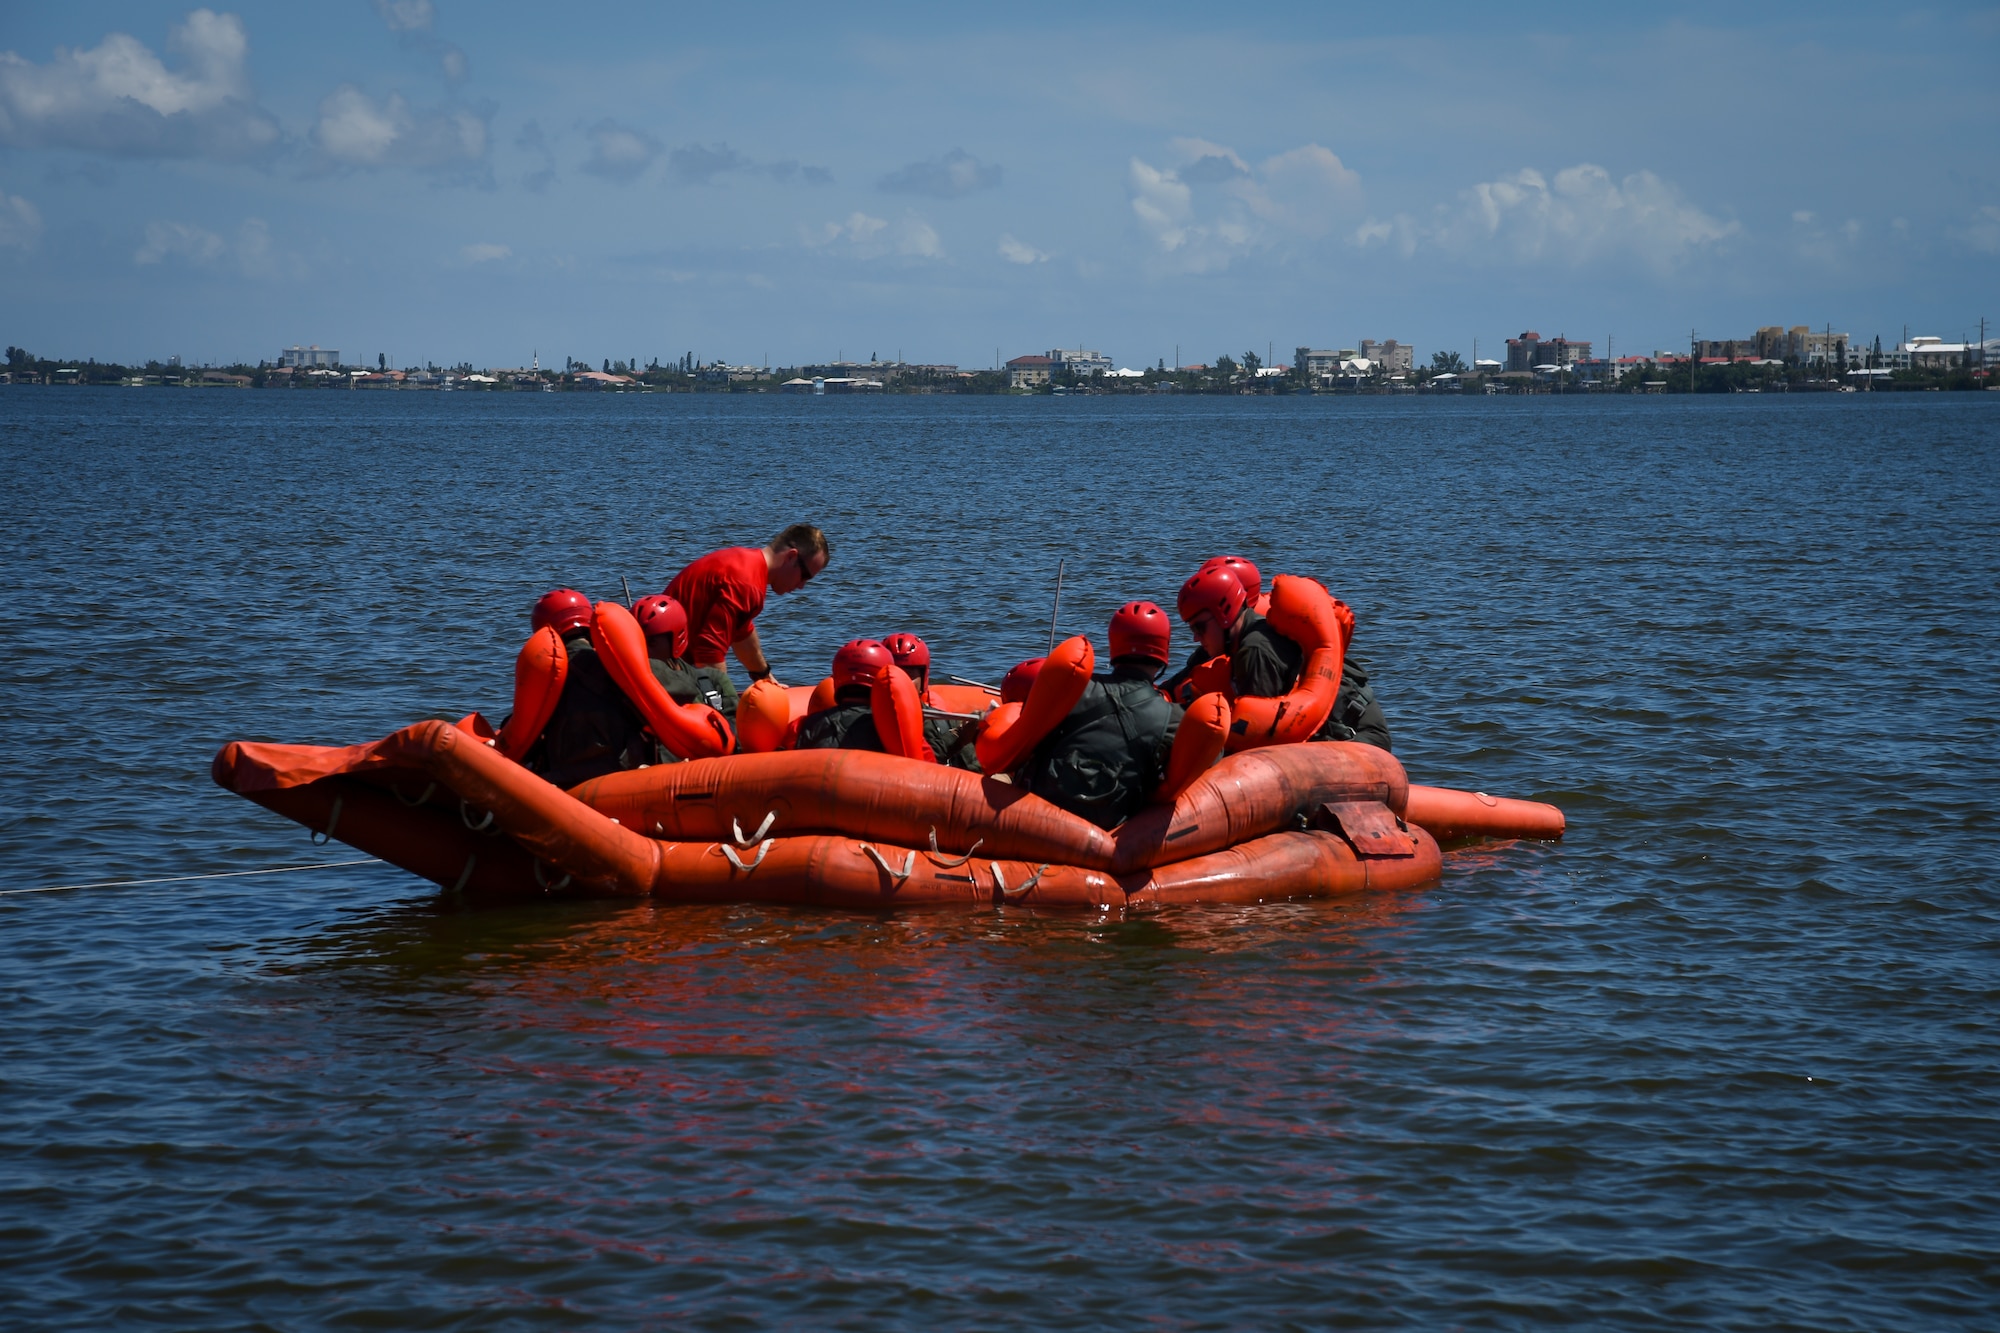 Aircrew from the 39th Rescue Squadron board a life raft Aug. 4, 2018, during water survival training at Patrick Air Force Base, Florida.